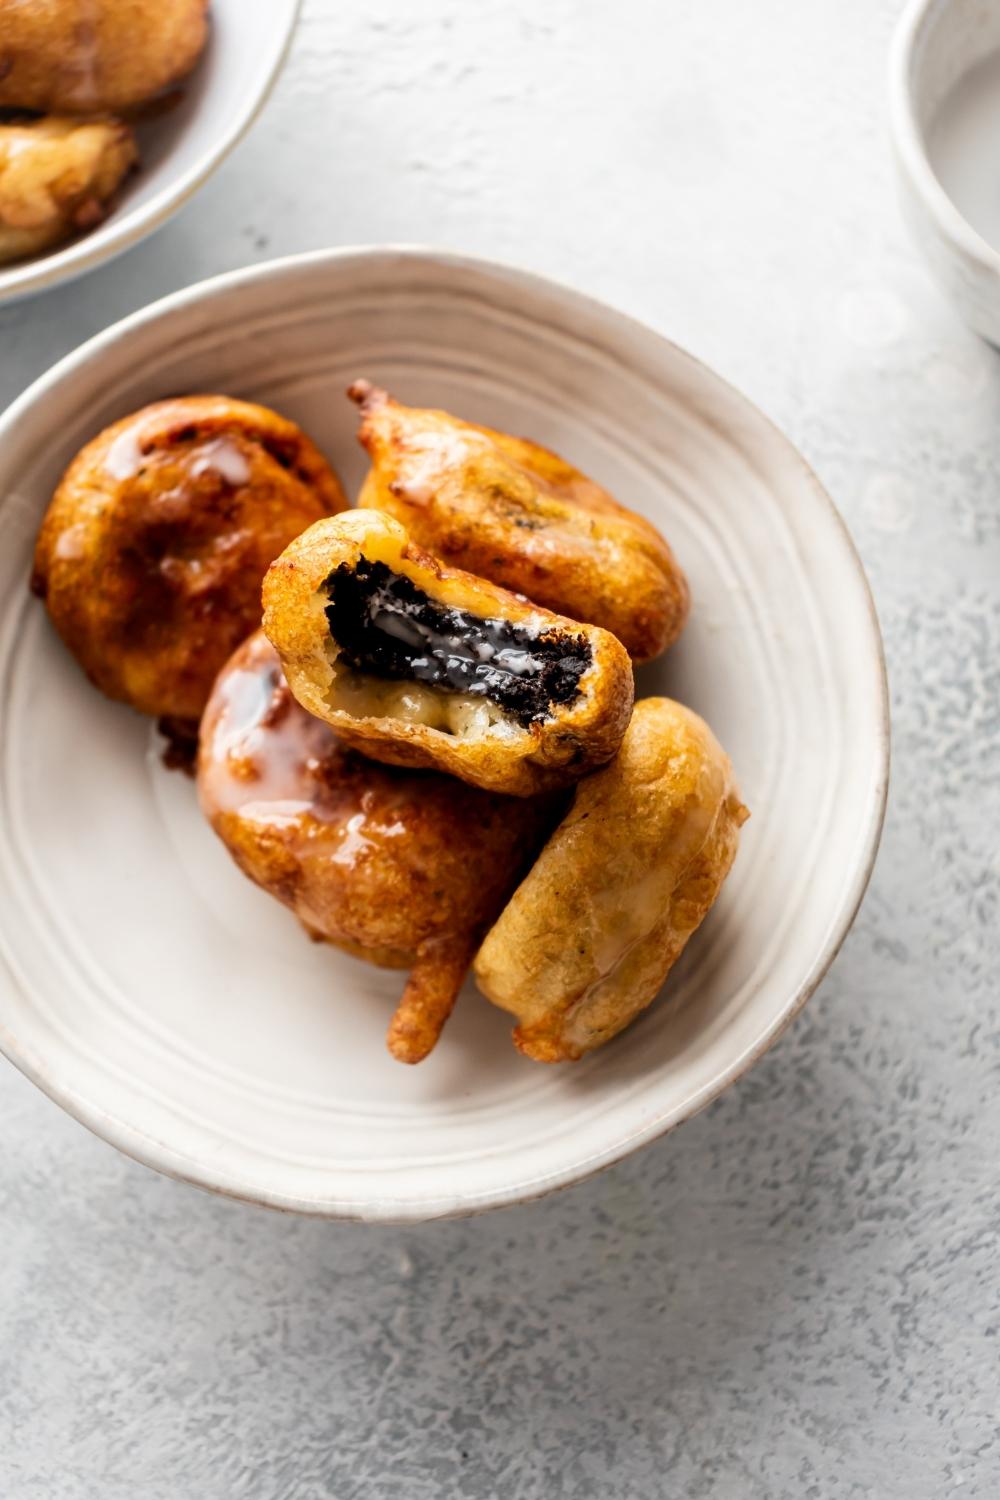 A pile of fried oreos with glaze. One oreo with a bite out of it in a ceramic bowl on a countertop